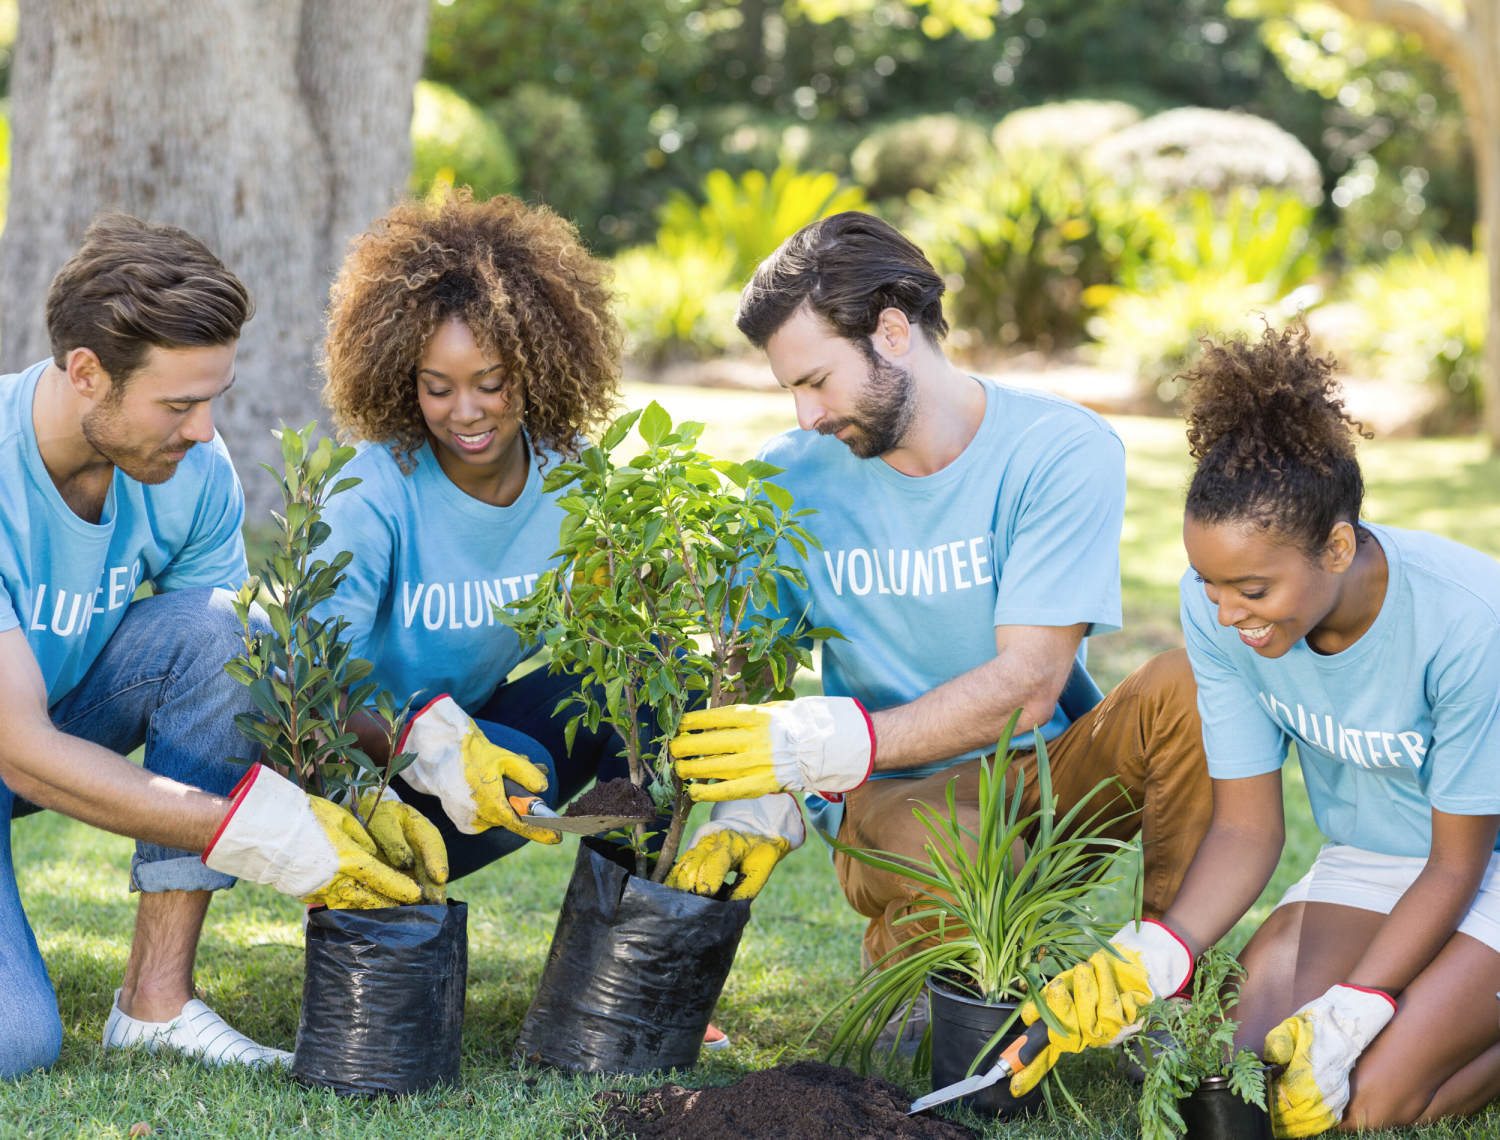 What are the benefits of volunteering?